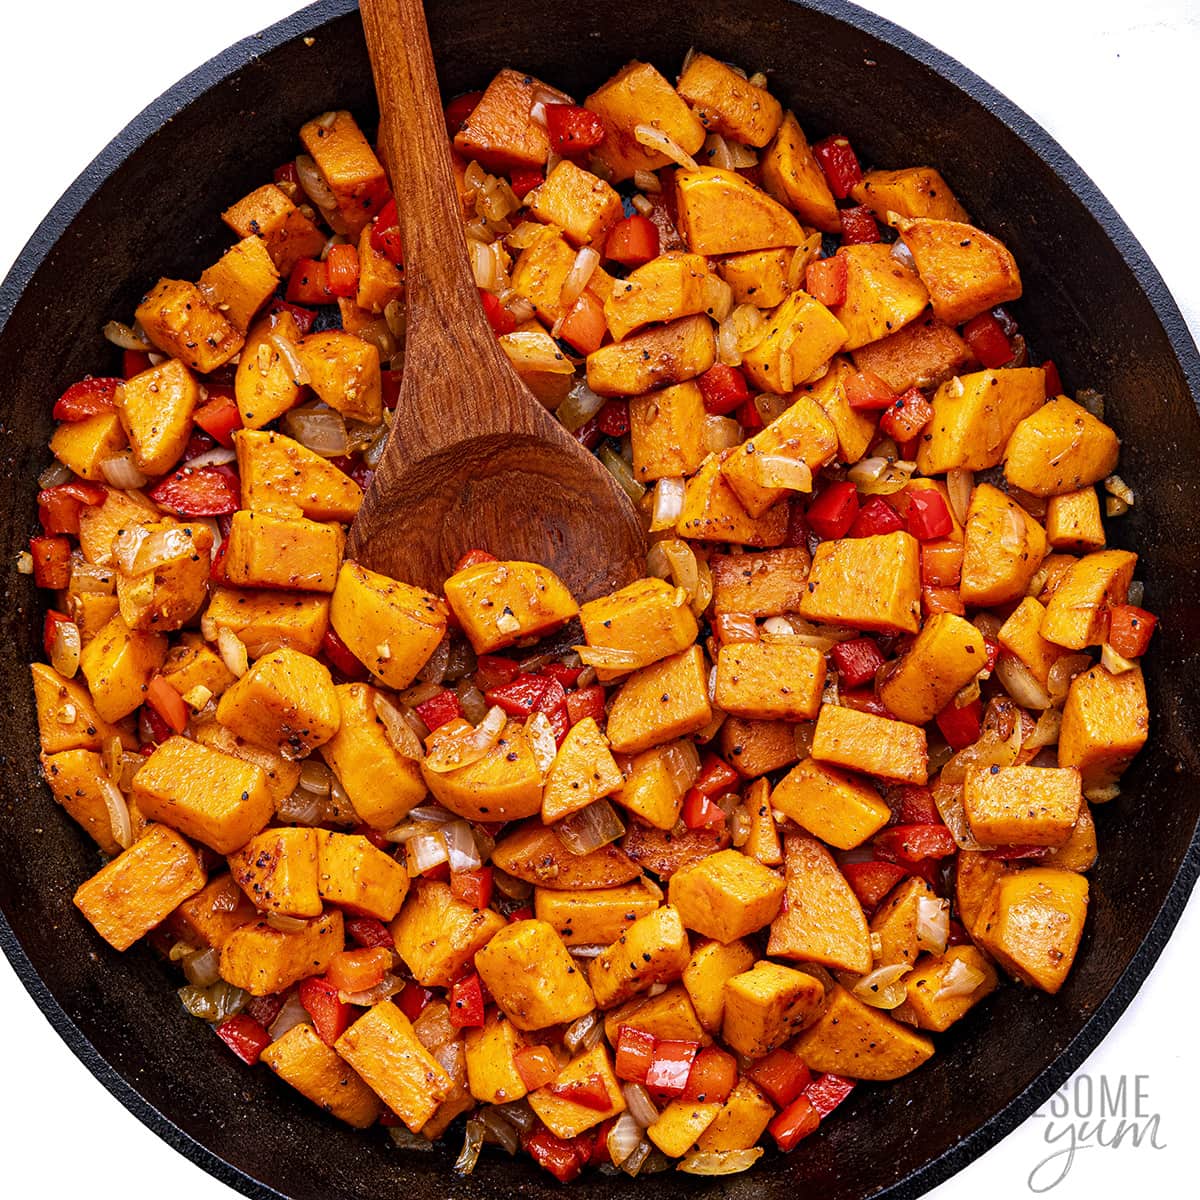 Red pepper, onion, and garlic cooked with sweet potatoes.